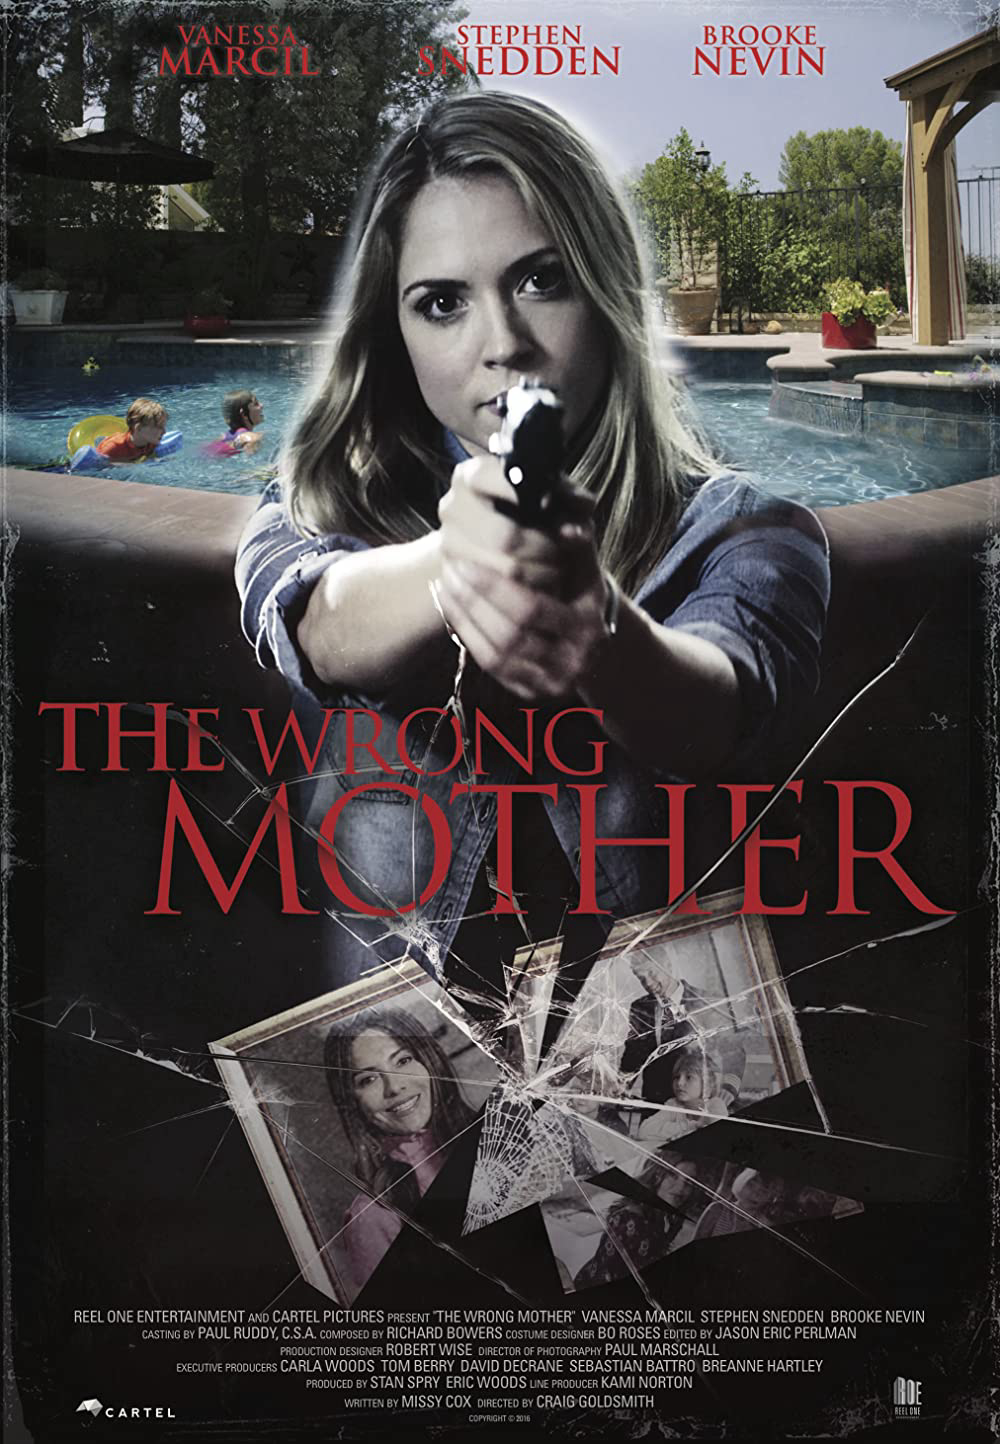 Poster Phim Người Mẹ Thật Sự (The Wrong Mother)